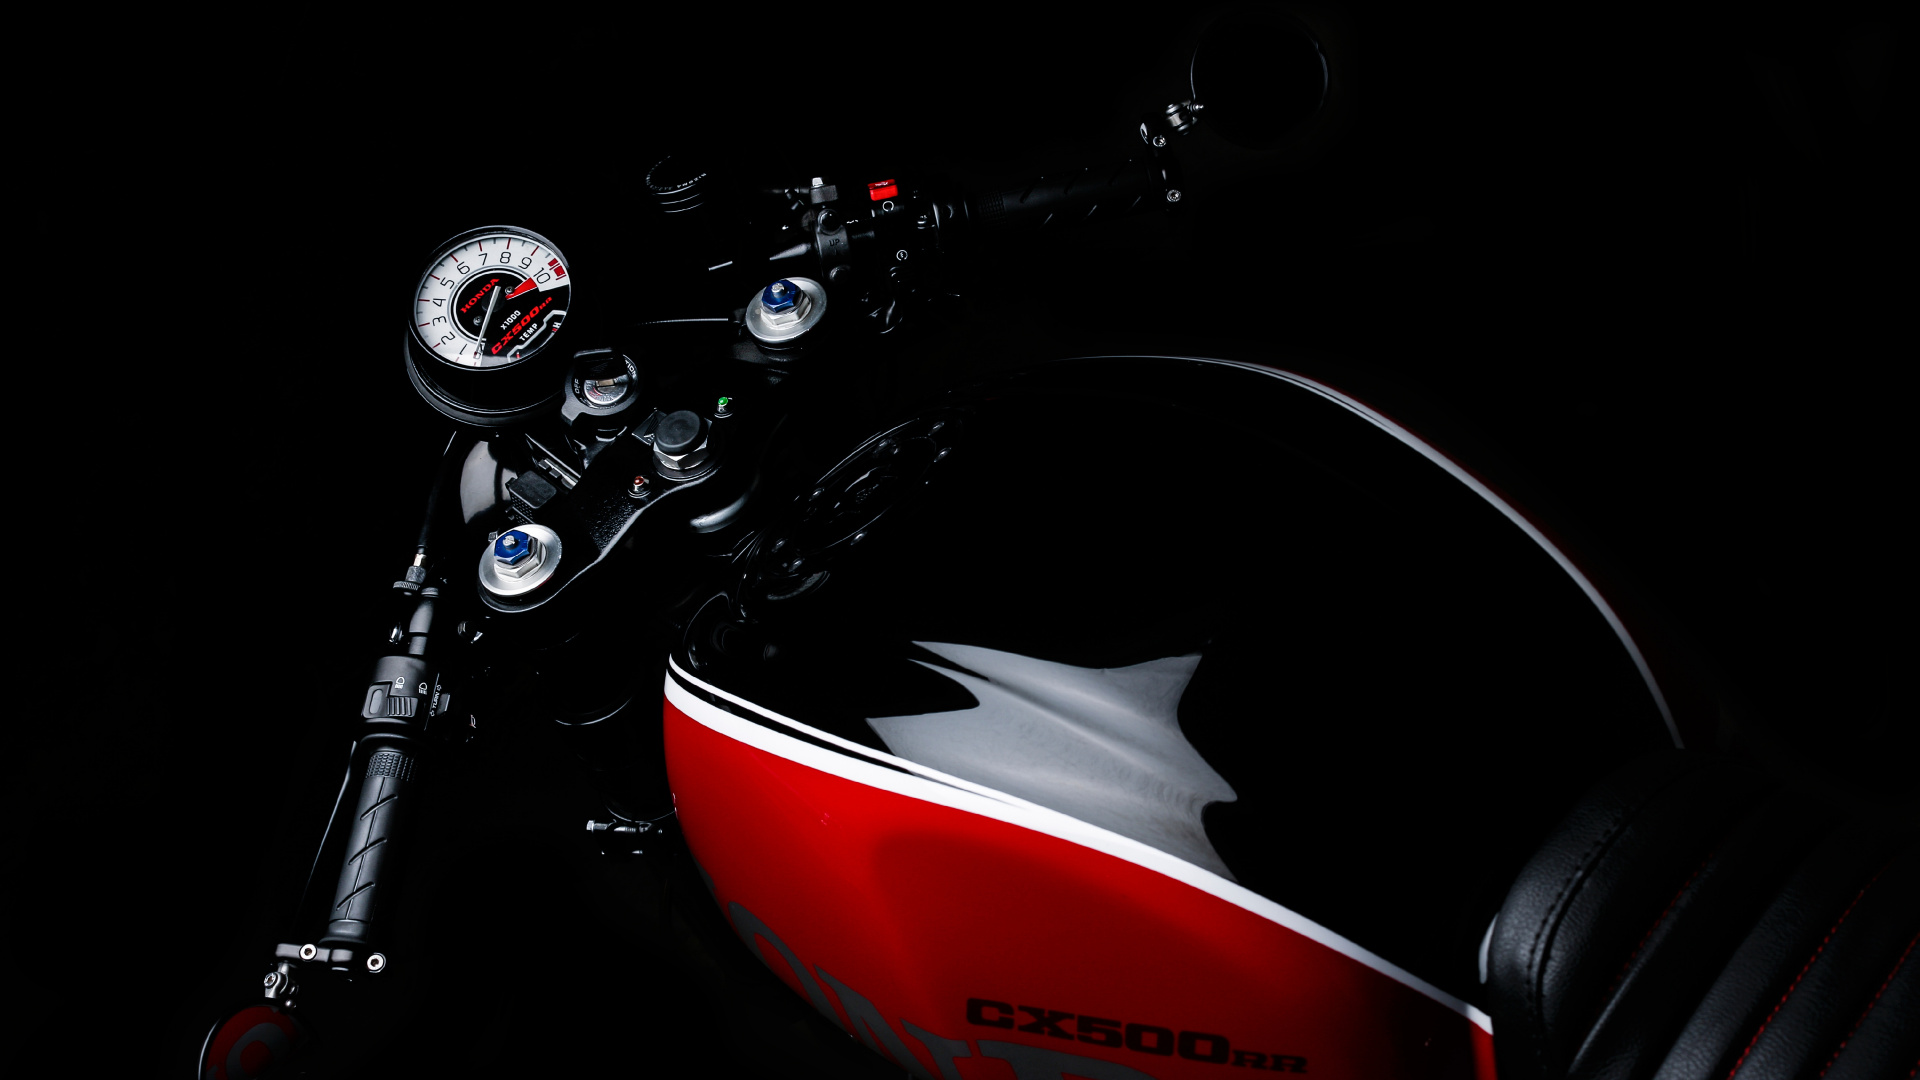 Red and Black Honda Motorcycle. Wallpaper in 1920x1080 Resolution